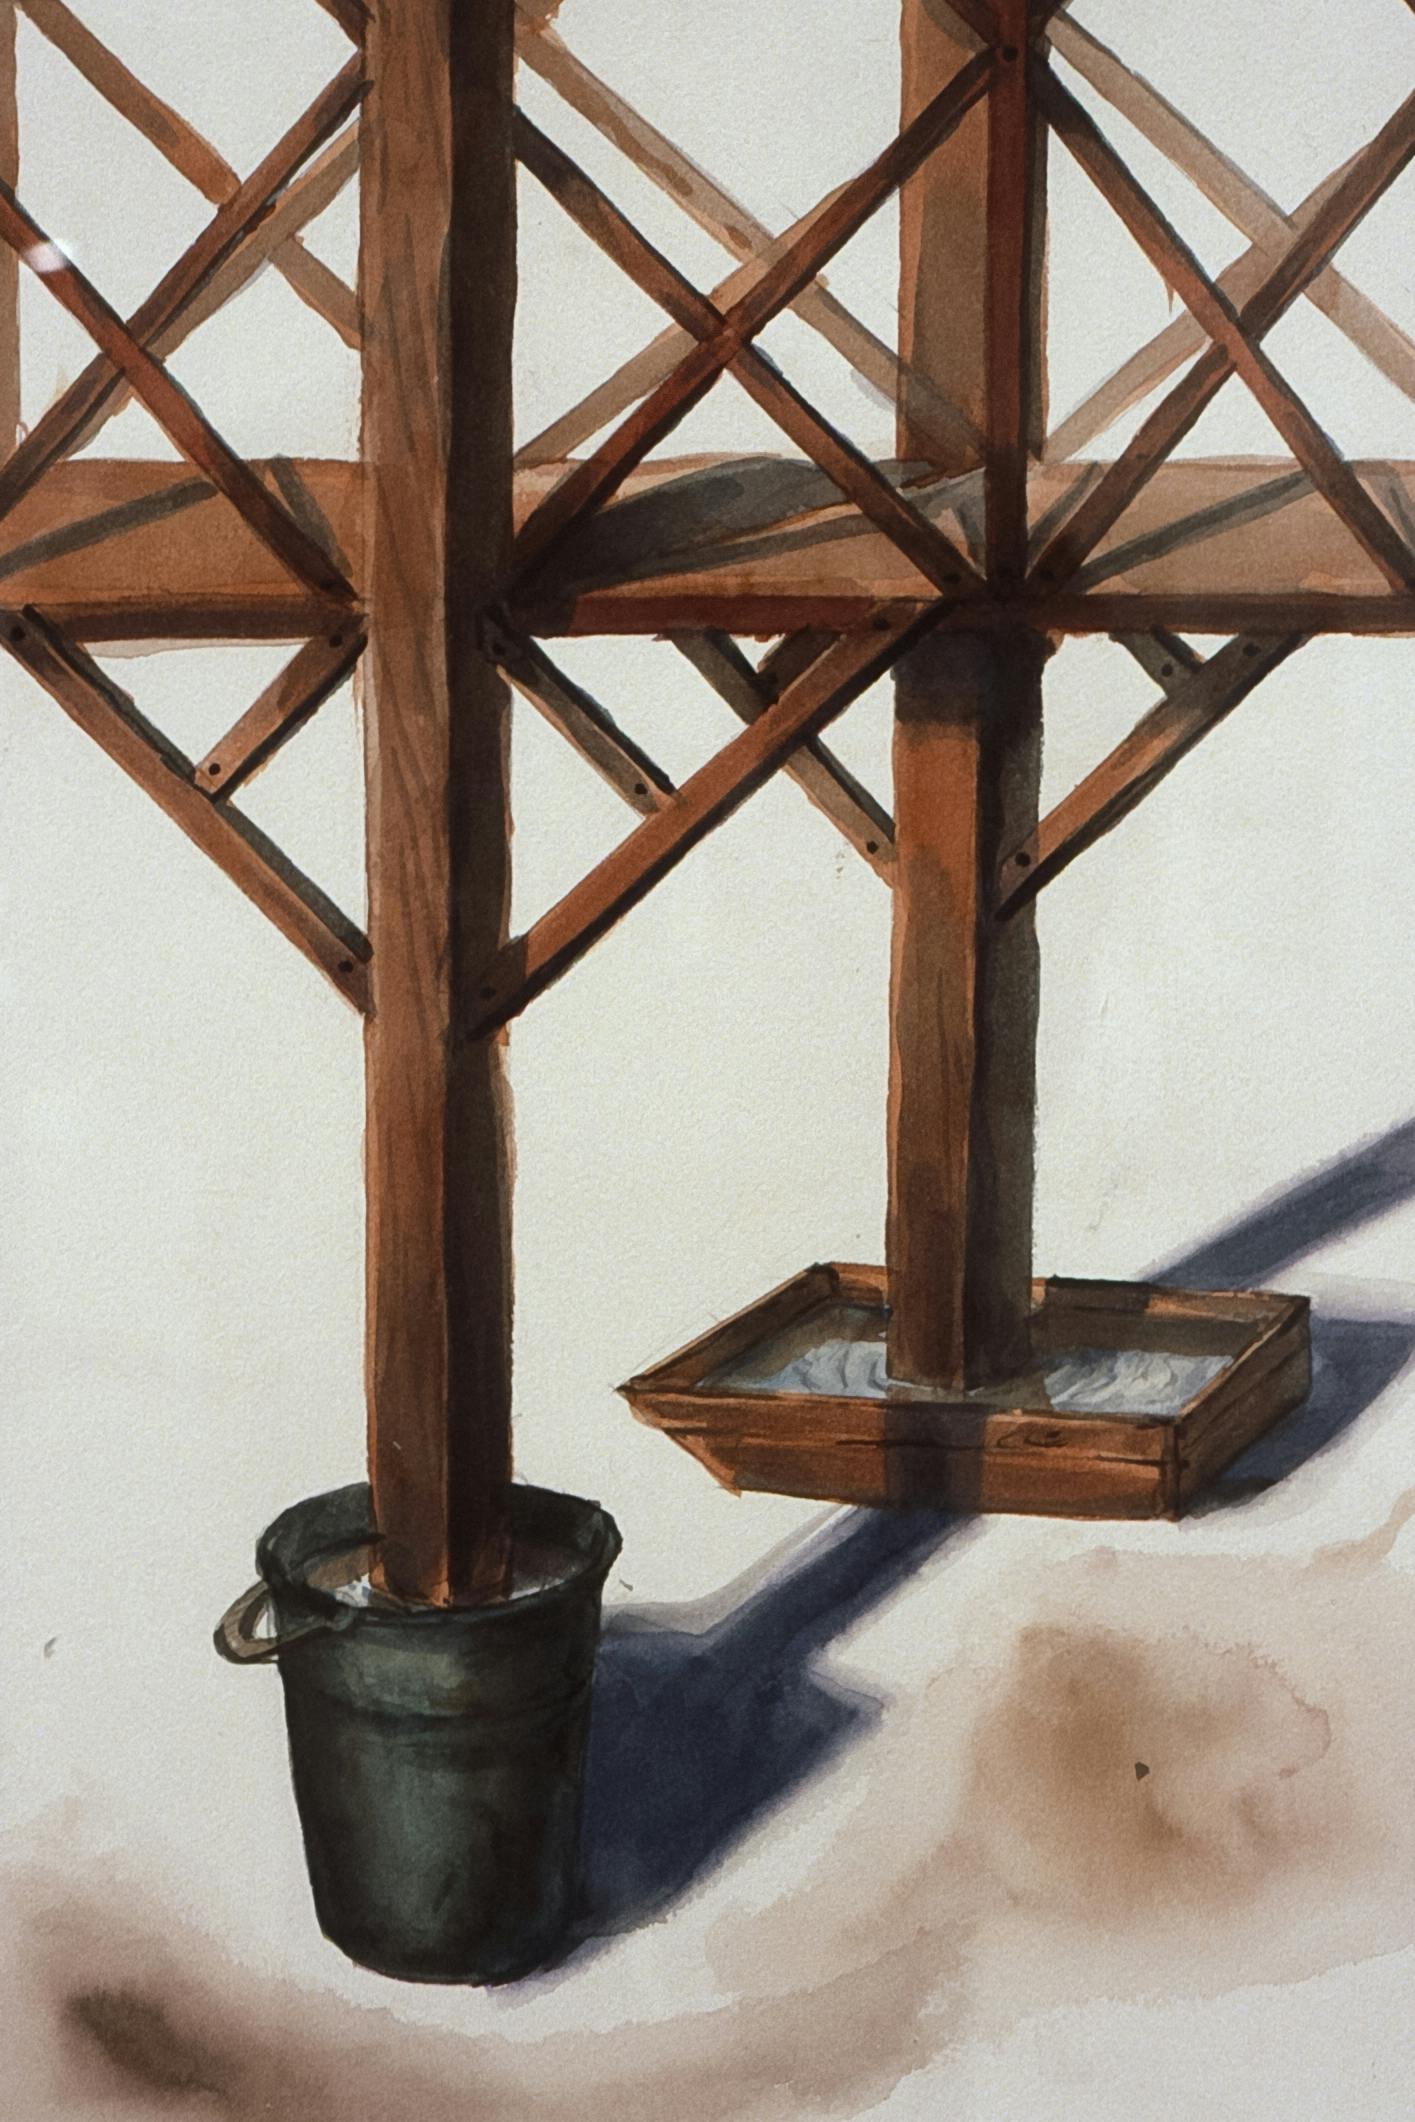 Detail of an illustration. The image shows a bottom part of wooden bridge. A bucket and a tray, filled with water, are placed under the columns.